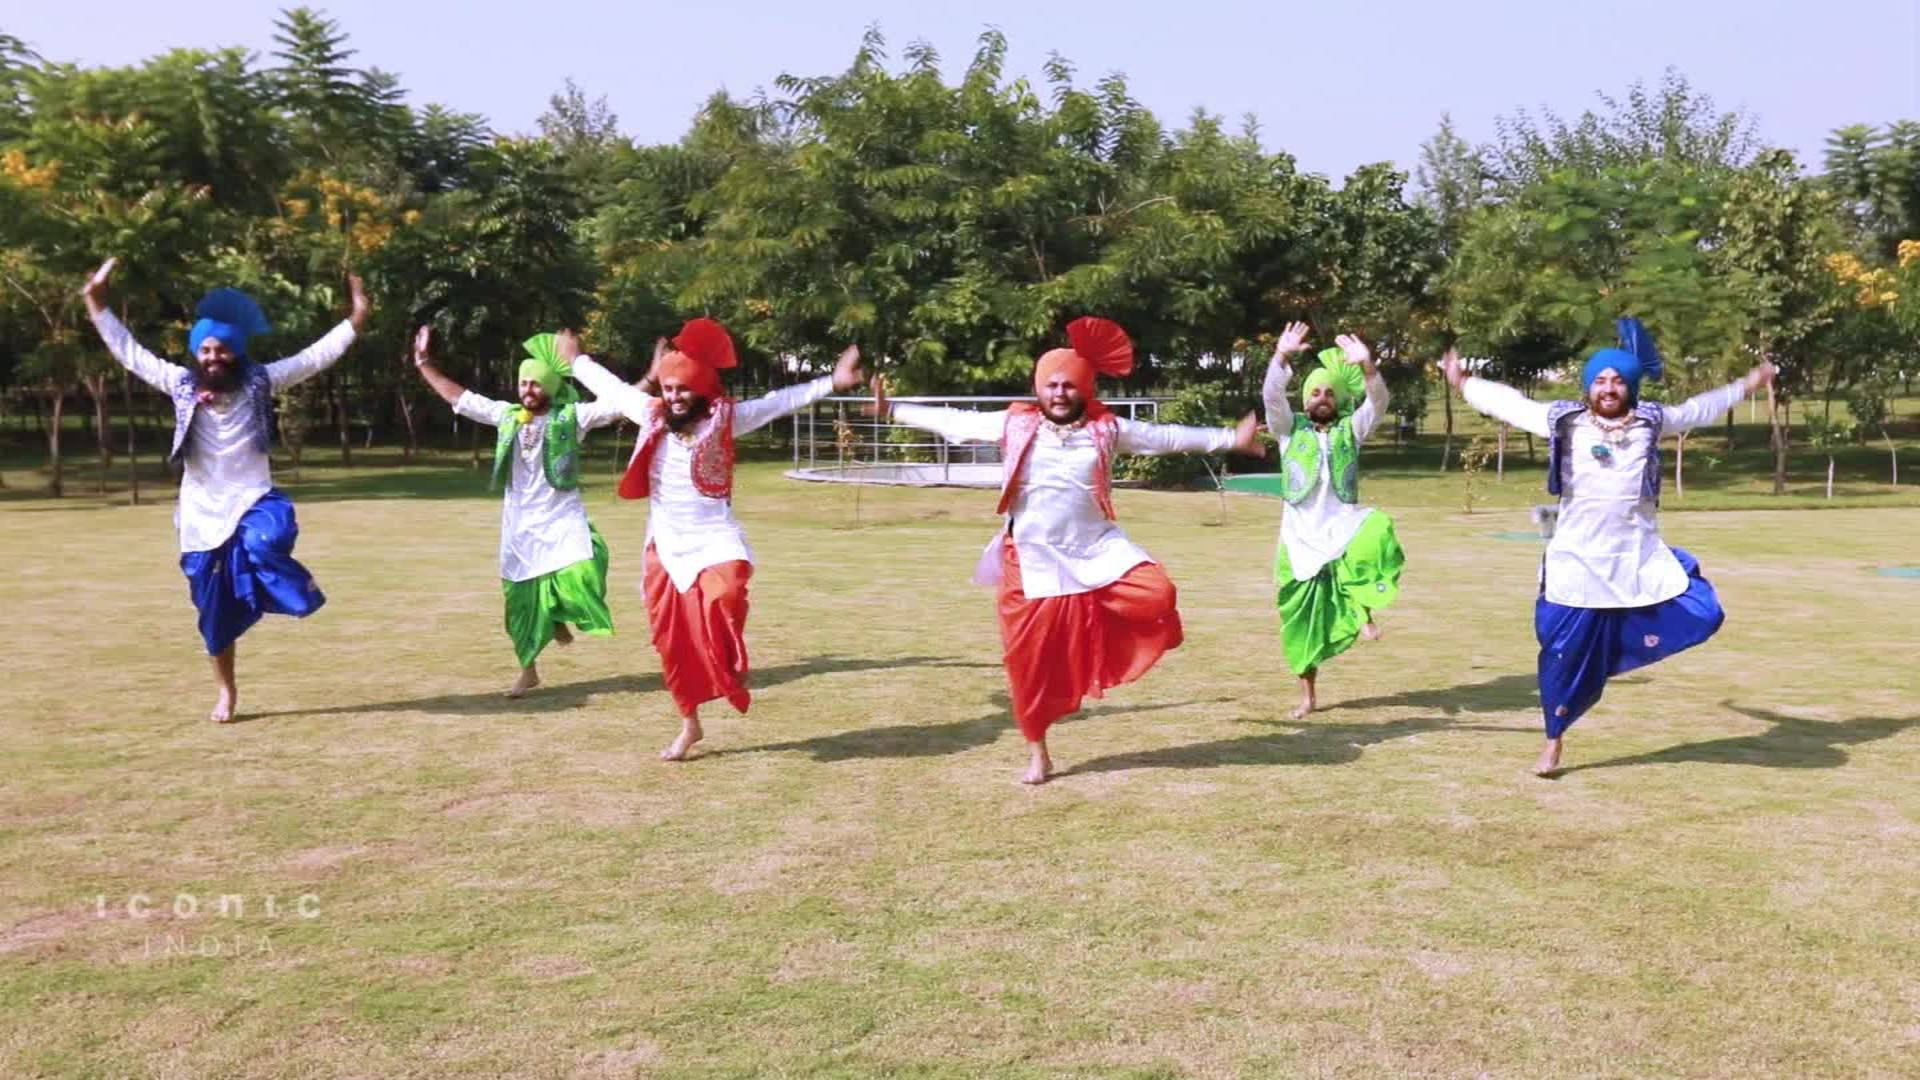 Bhangra: One of India's most energetic dances